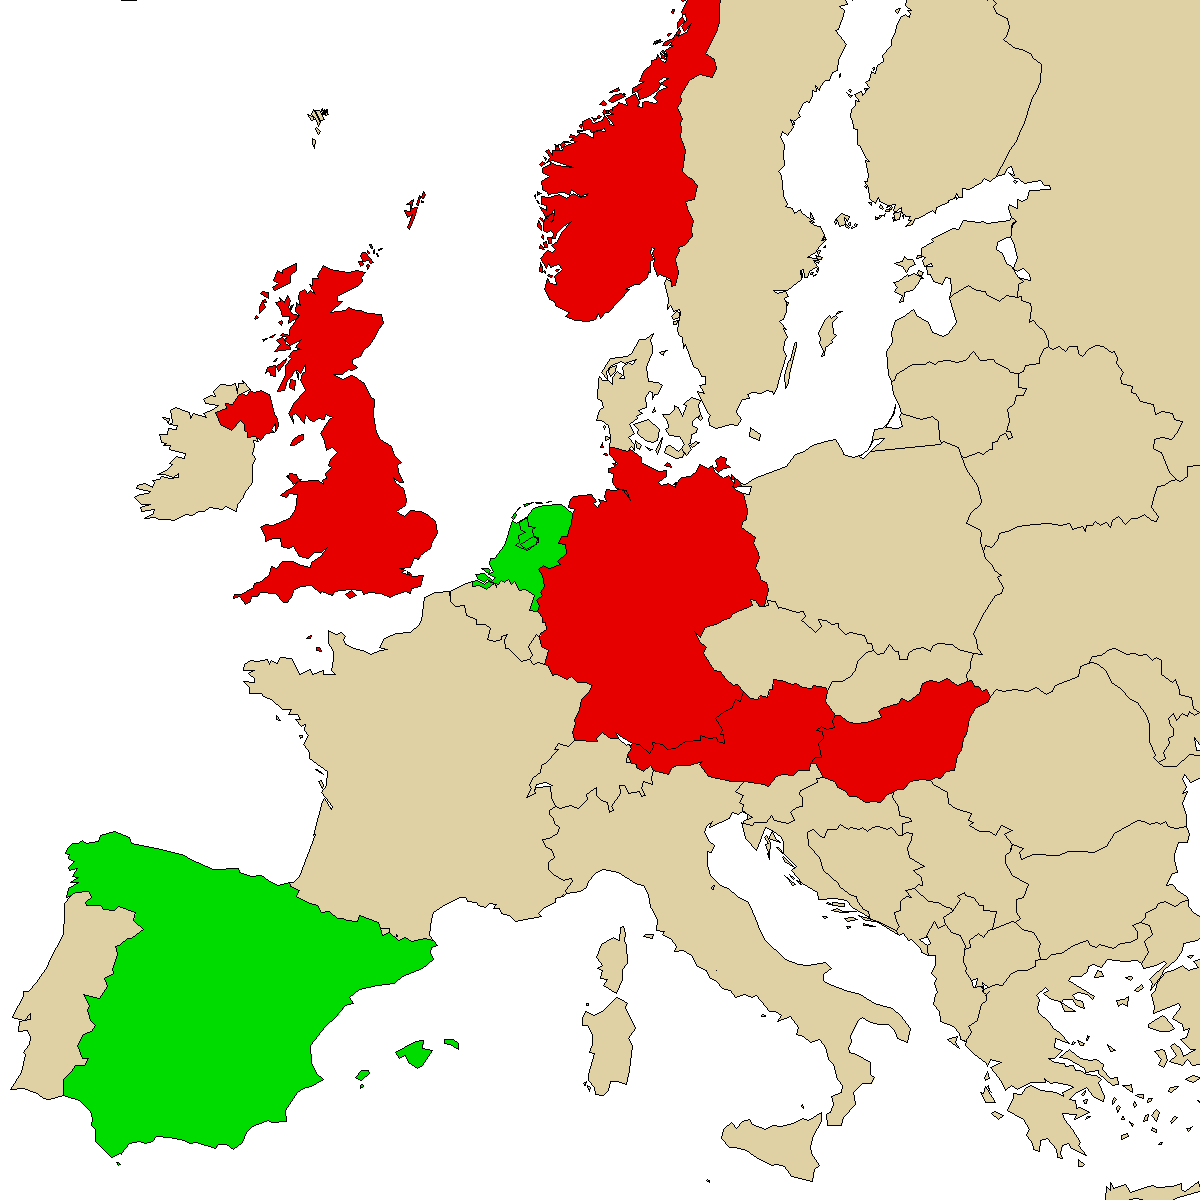 legal info map for our product 3FMA, green are countries with no ban, red with ban, grey is unknown